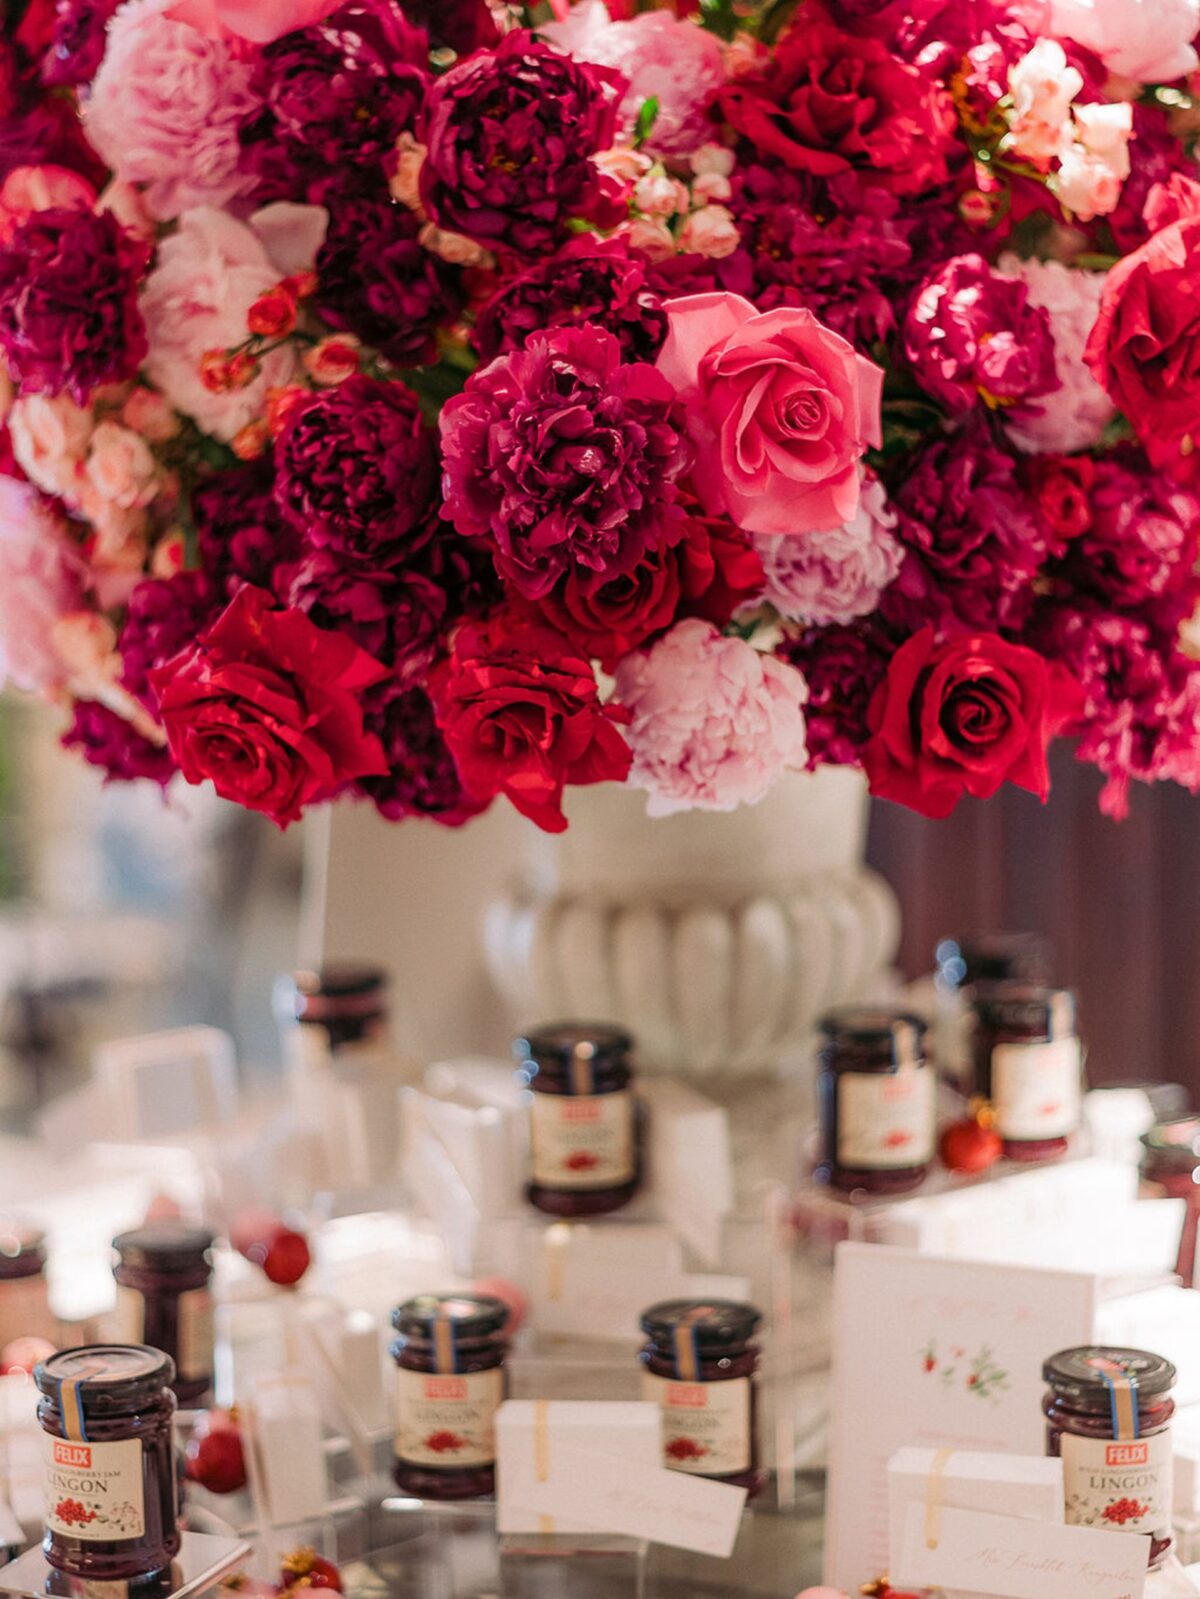 Close up image of large urn of red and pink roses and peonies